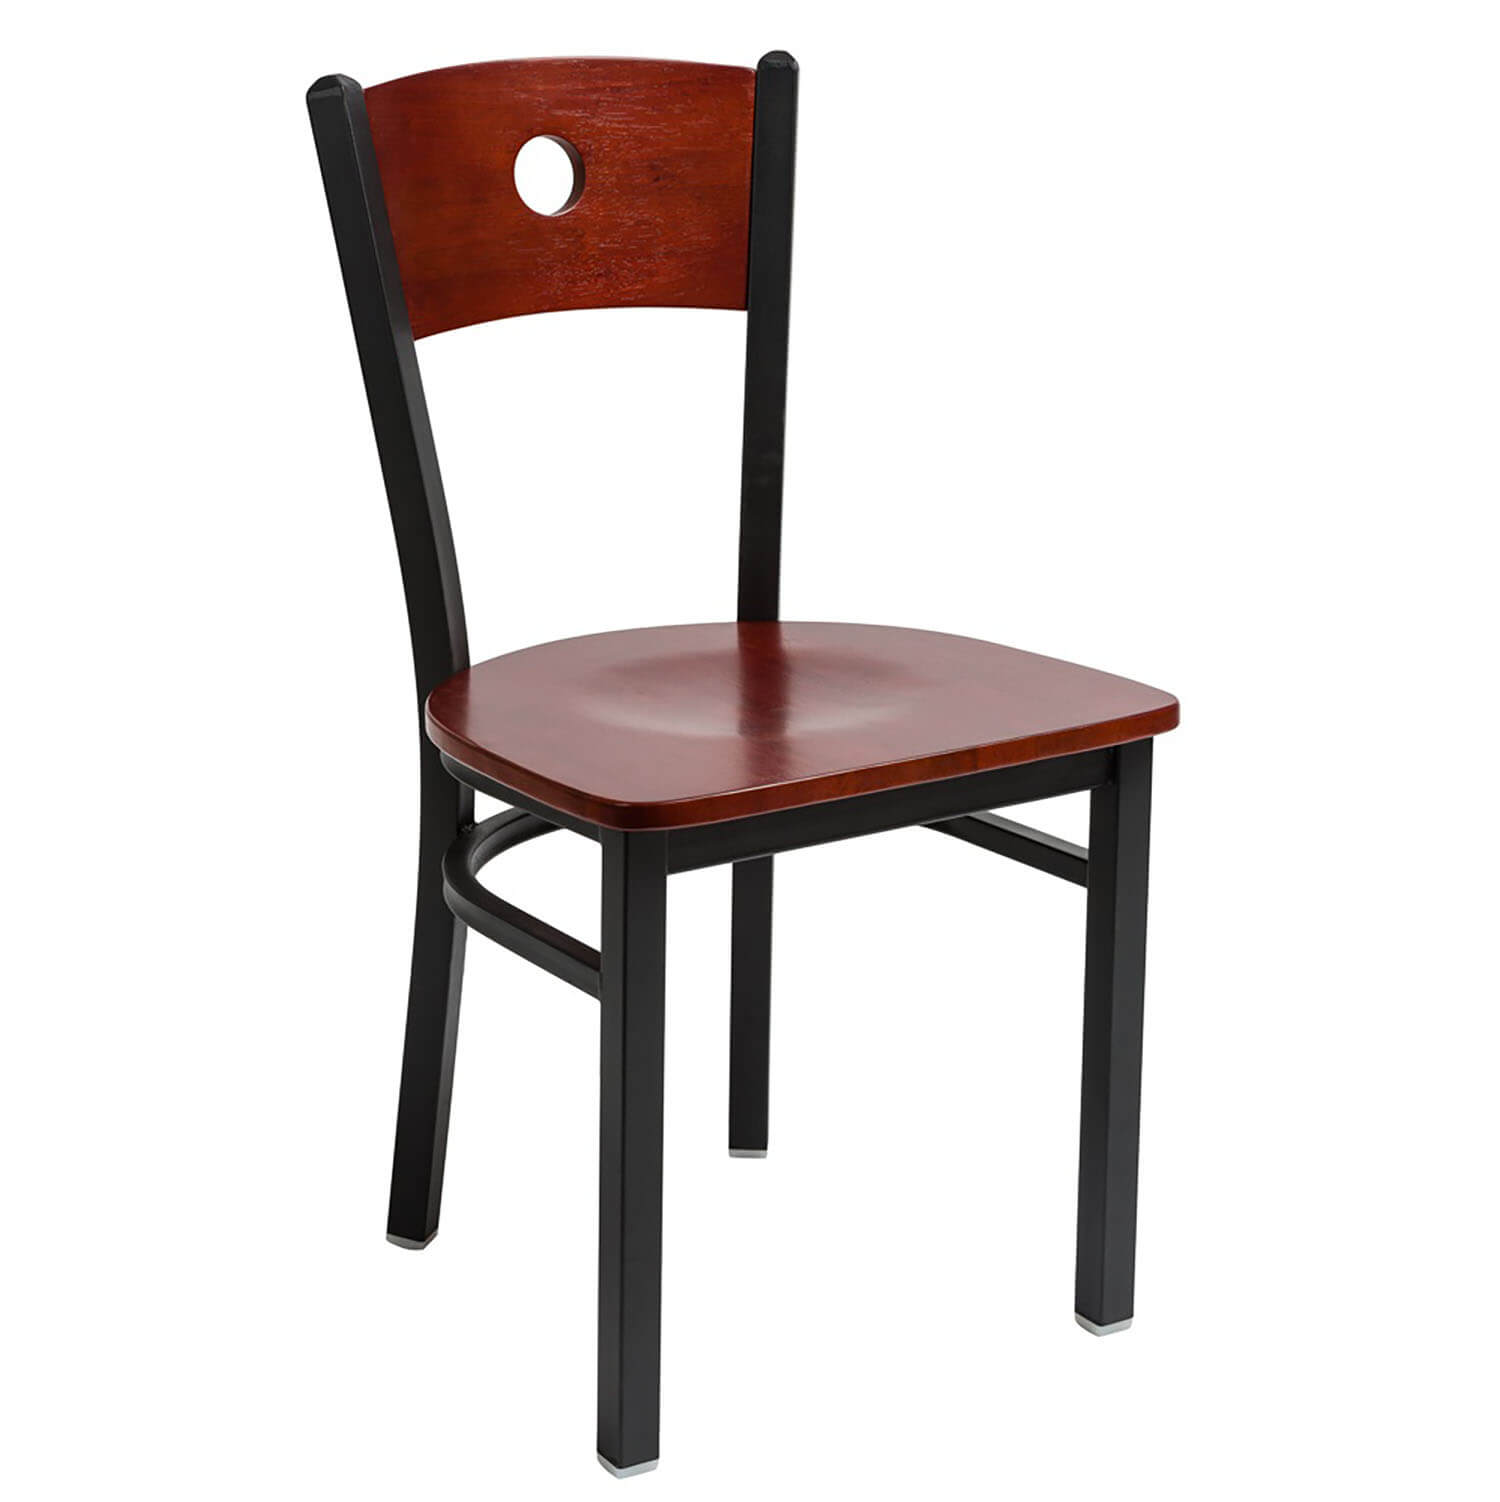 BFM Darby Circle Wood Back Indoor Restaurant Chair